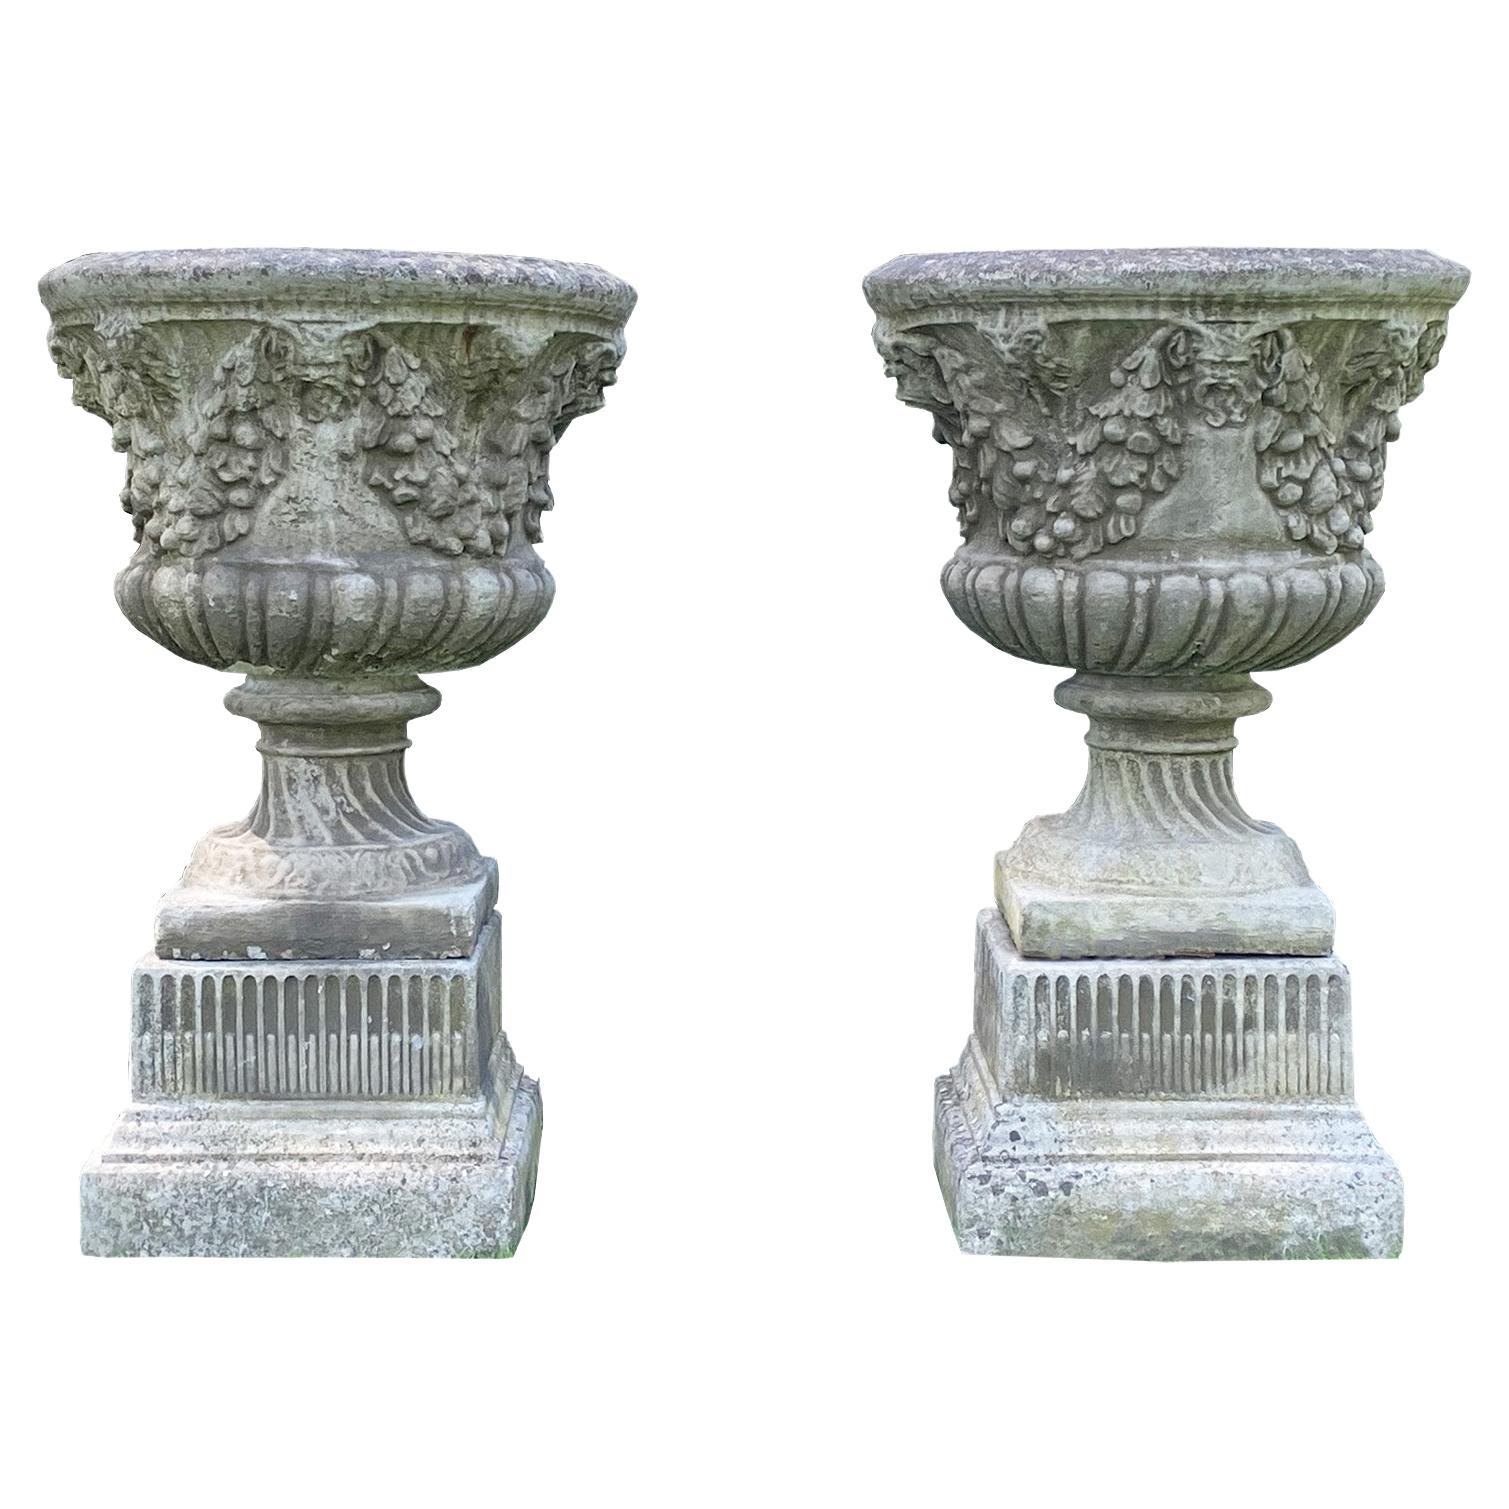 Pair of Swag and Mask Composition Stone Urns on Decorative Pedestals